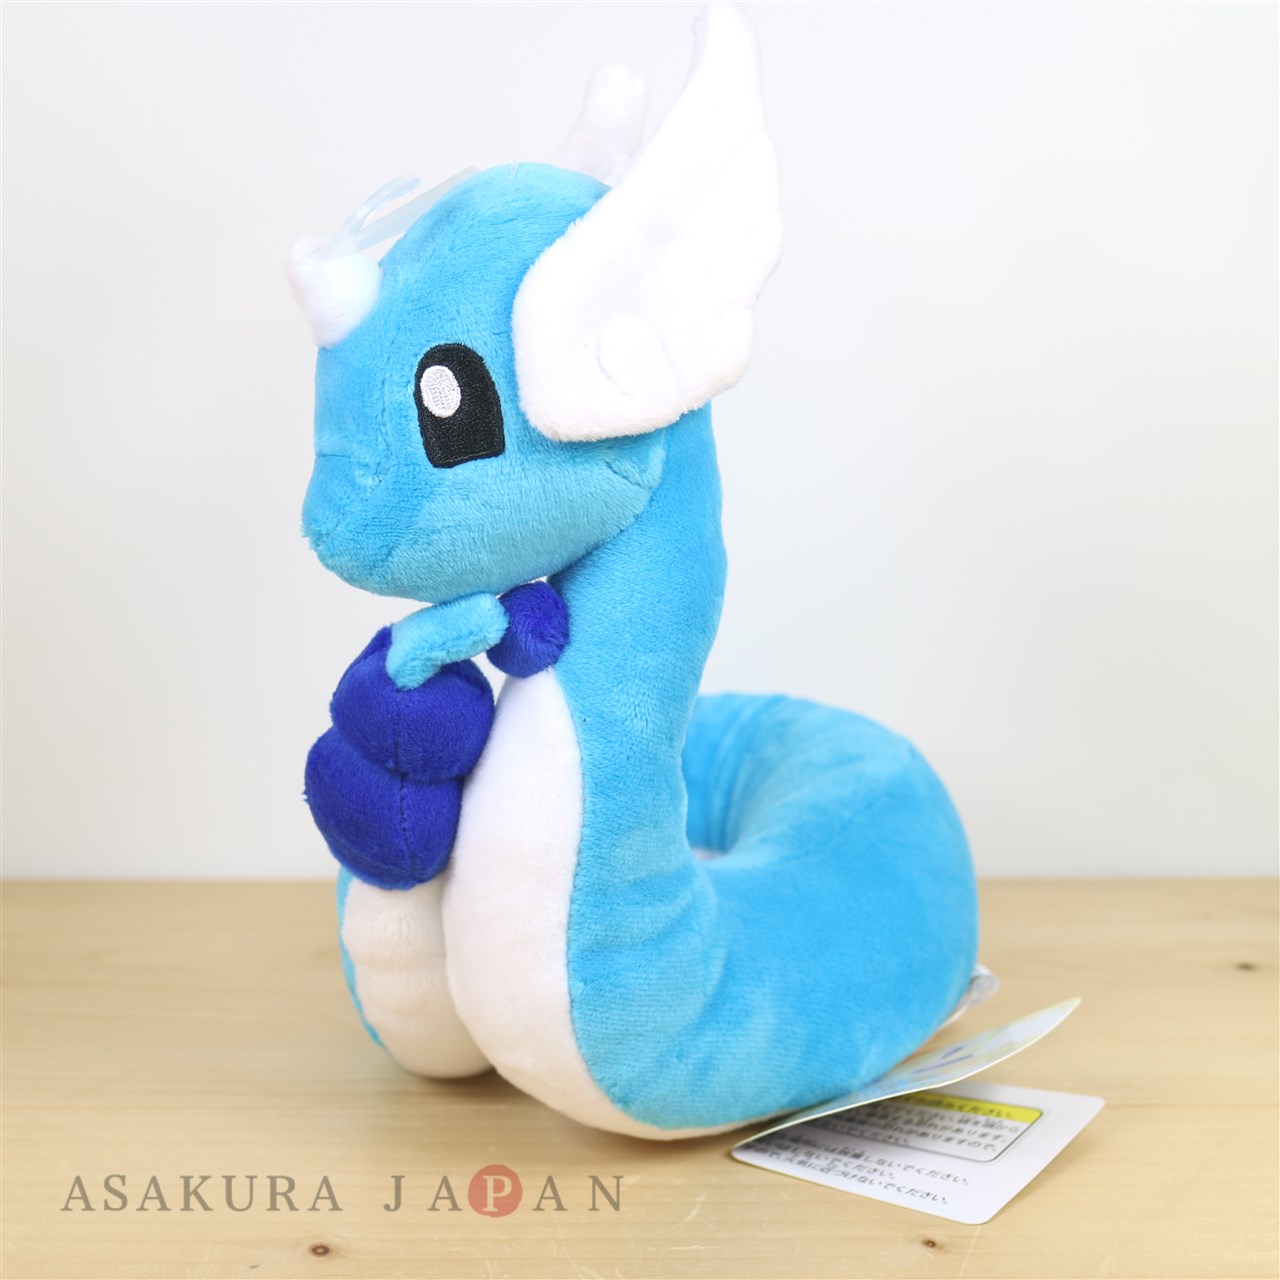 Details about   Sanei Pokemon  ALL STAR COLLECTION Dratini size S Plush Doll Stuffed Toy H:18cm 